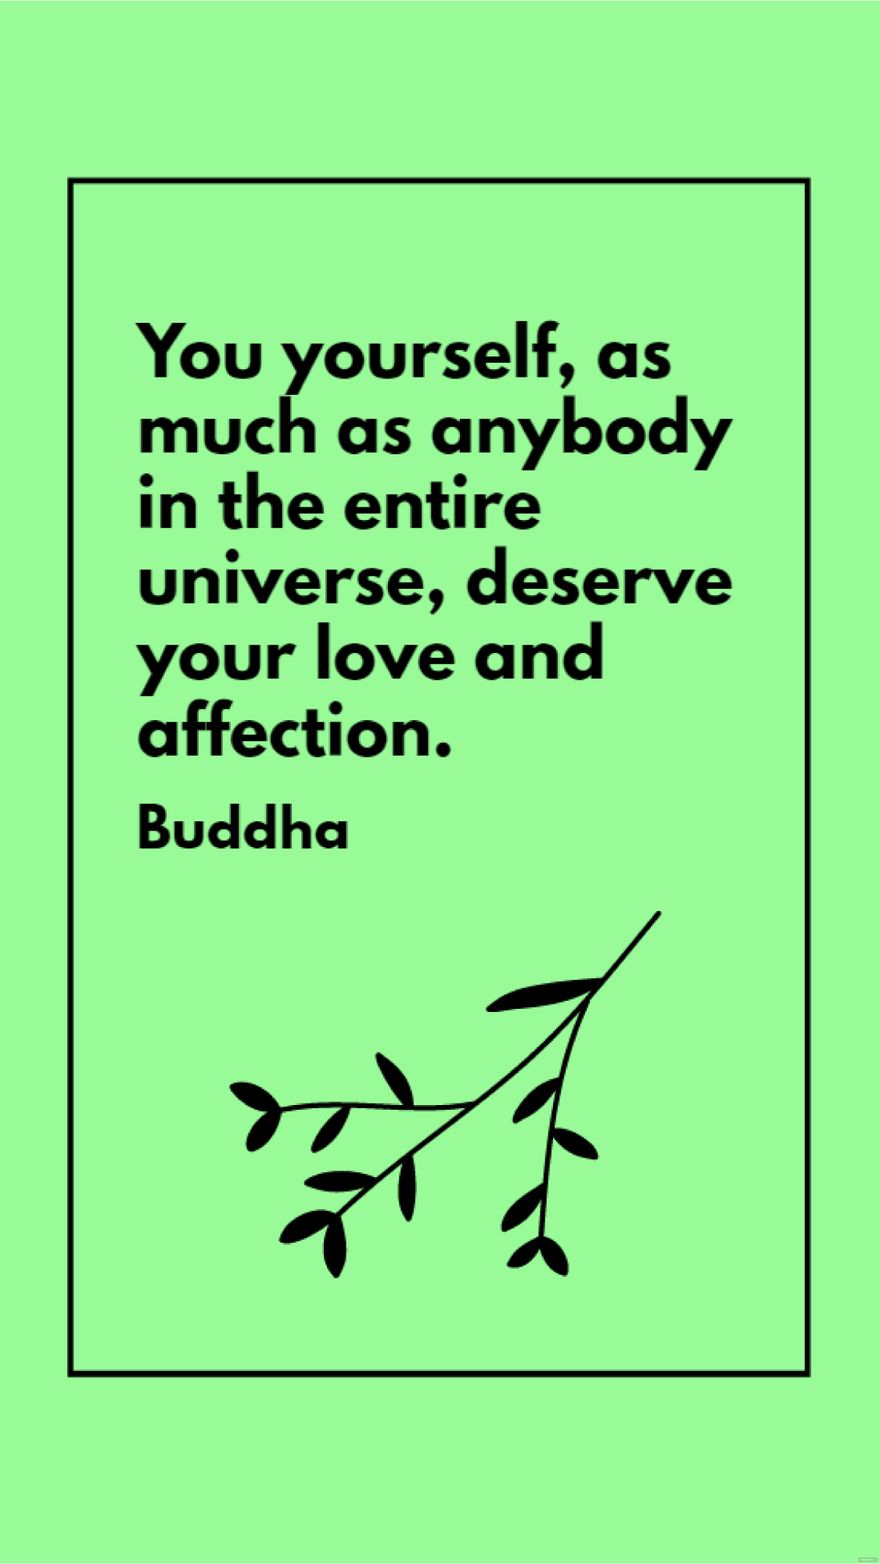 Buddha - You yourself, as much as anybody in the entire universe, deserve your love and affection. in JPG